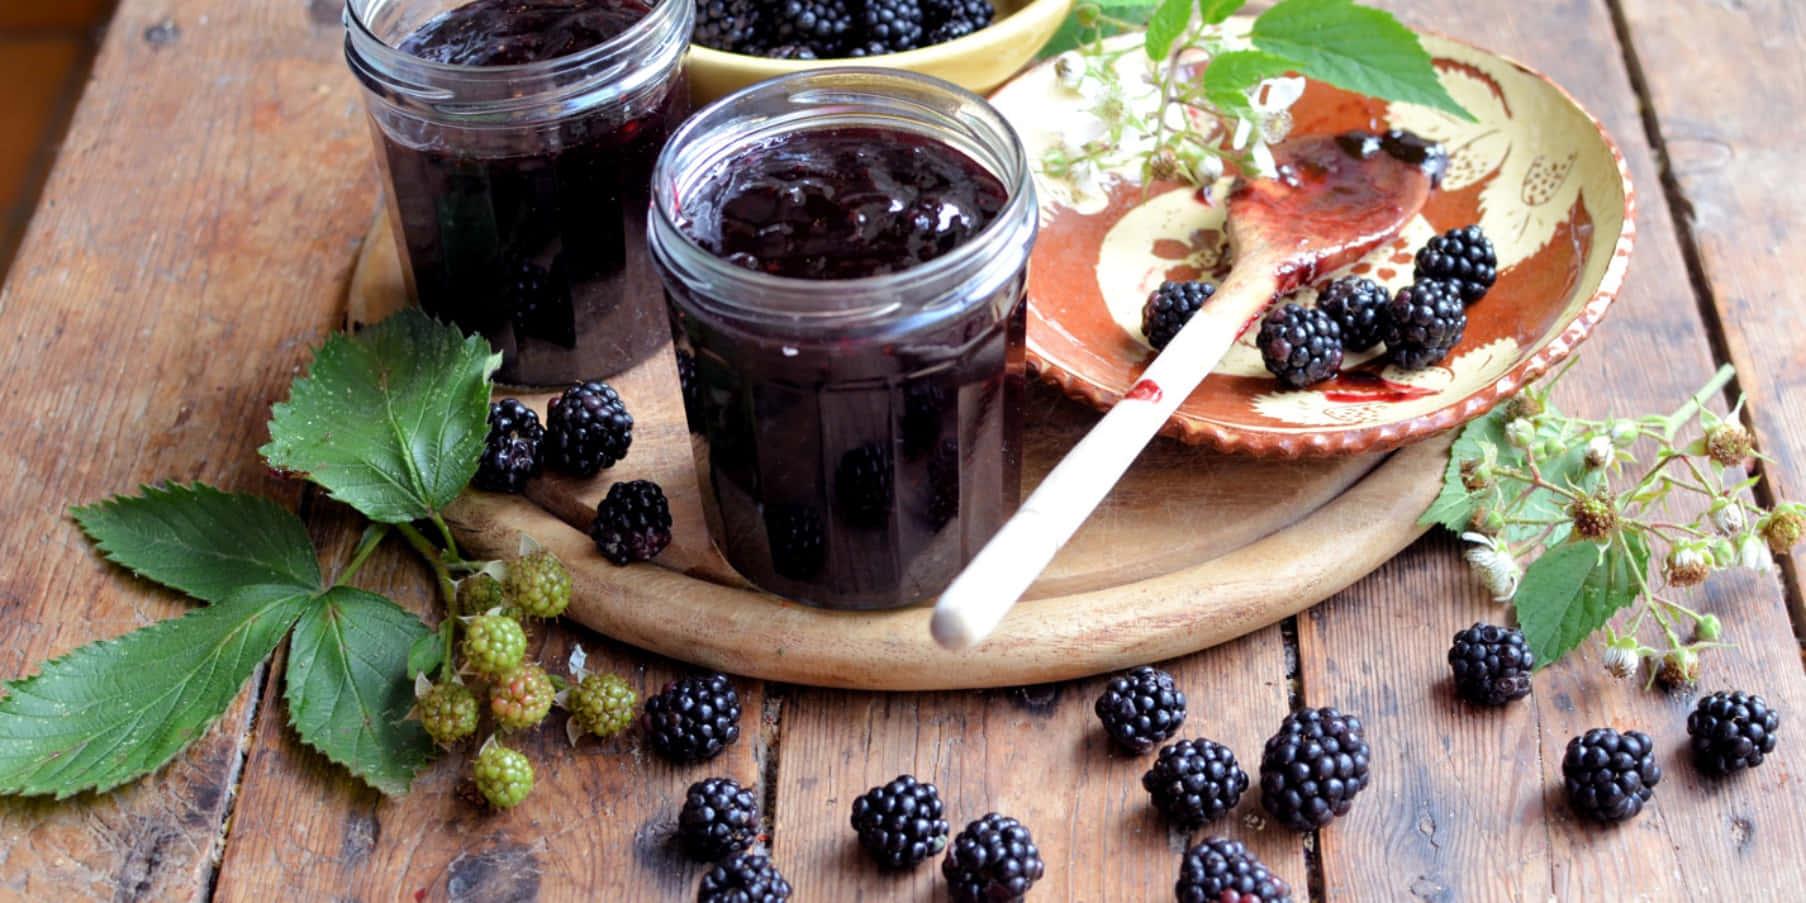 Homemade blackberry jam, the perfect accompaniment to any meal. Wallpaper